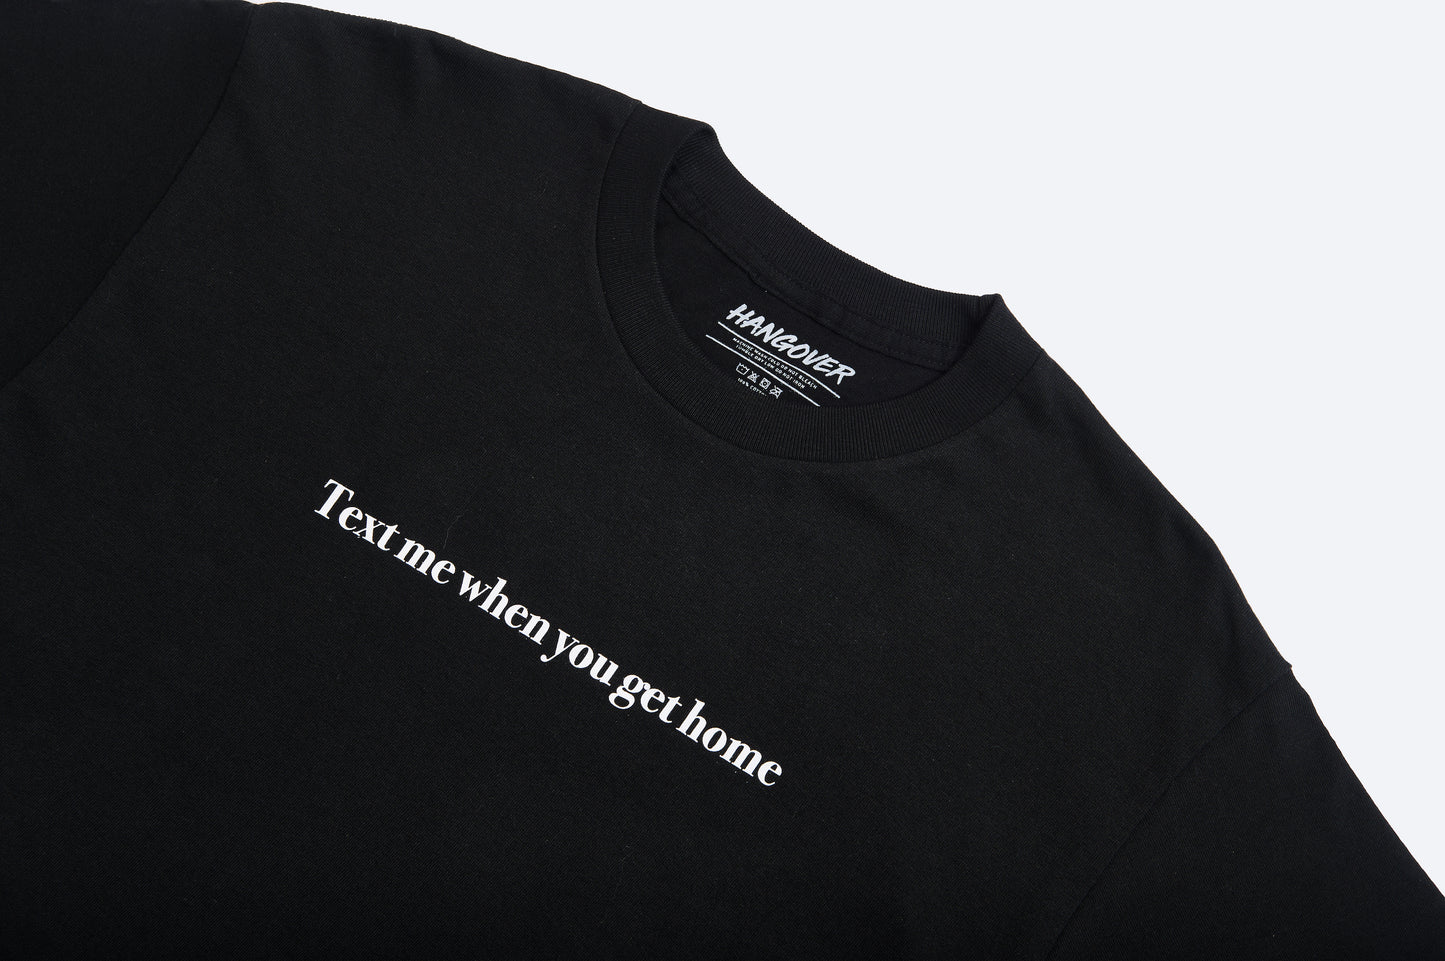 TEXT ME WHEN YOU GET HOME - BLACK